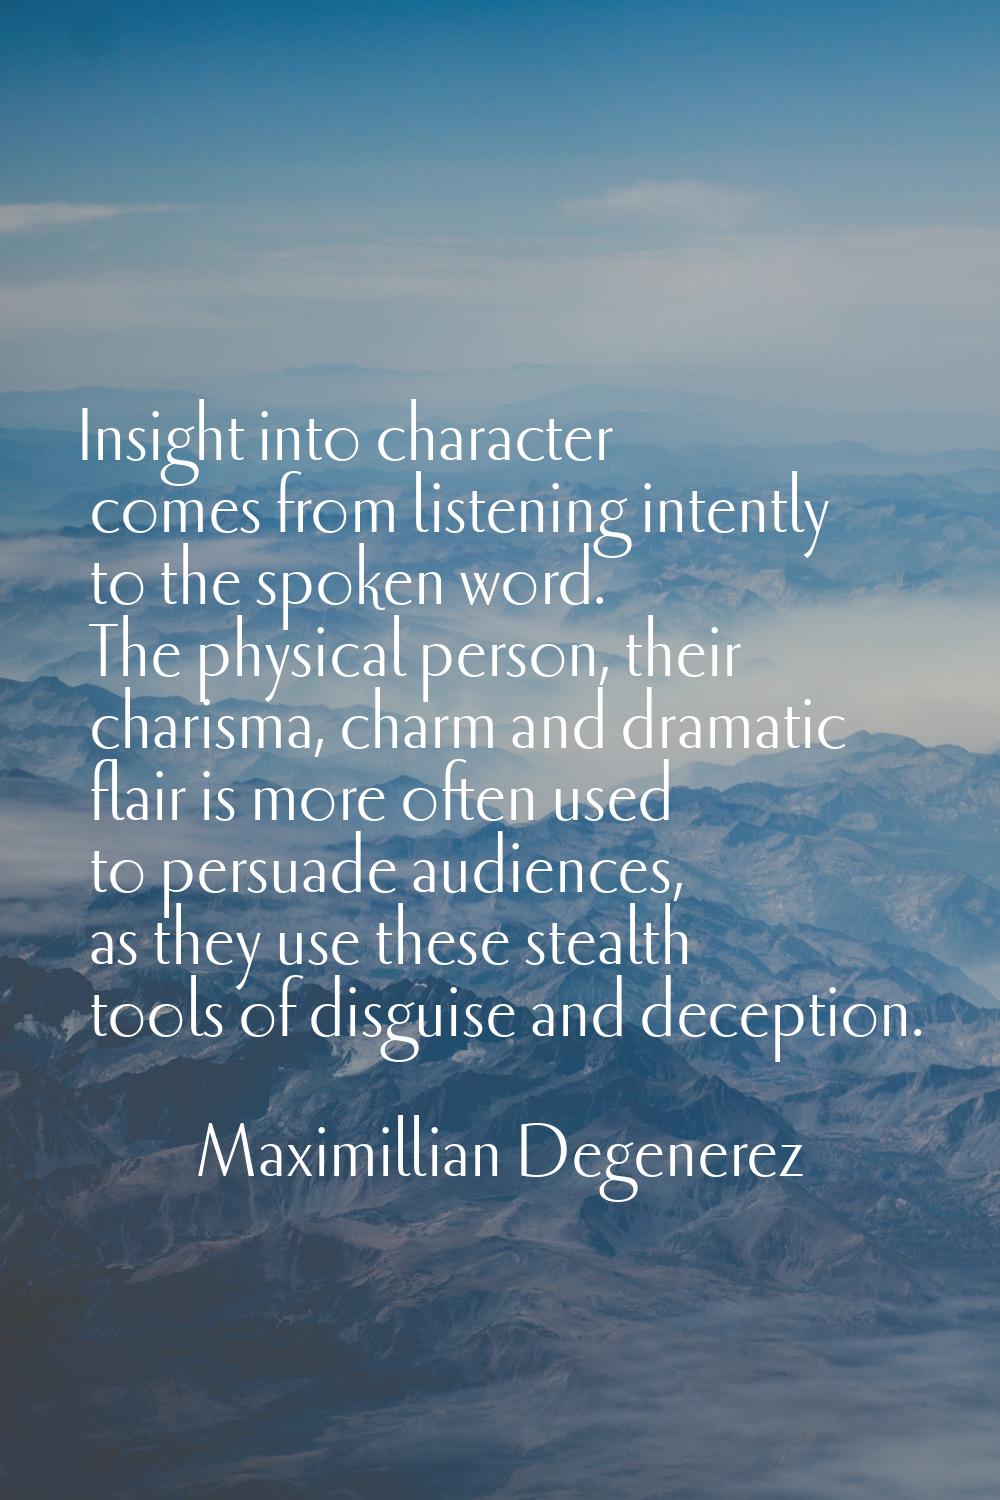 Insight into character comes from listening intently to the spoken word. The physical person, their